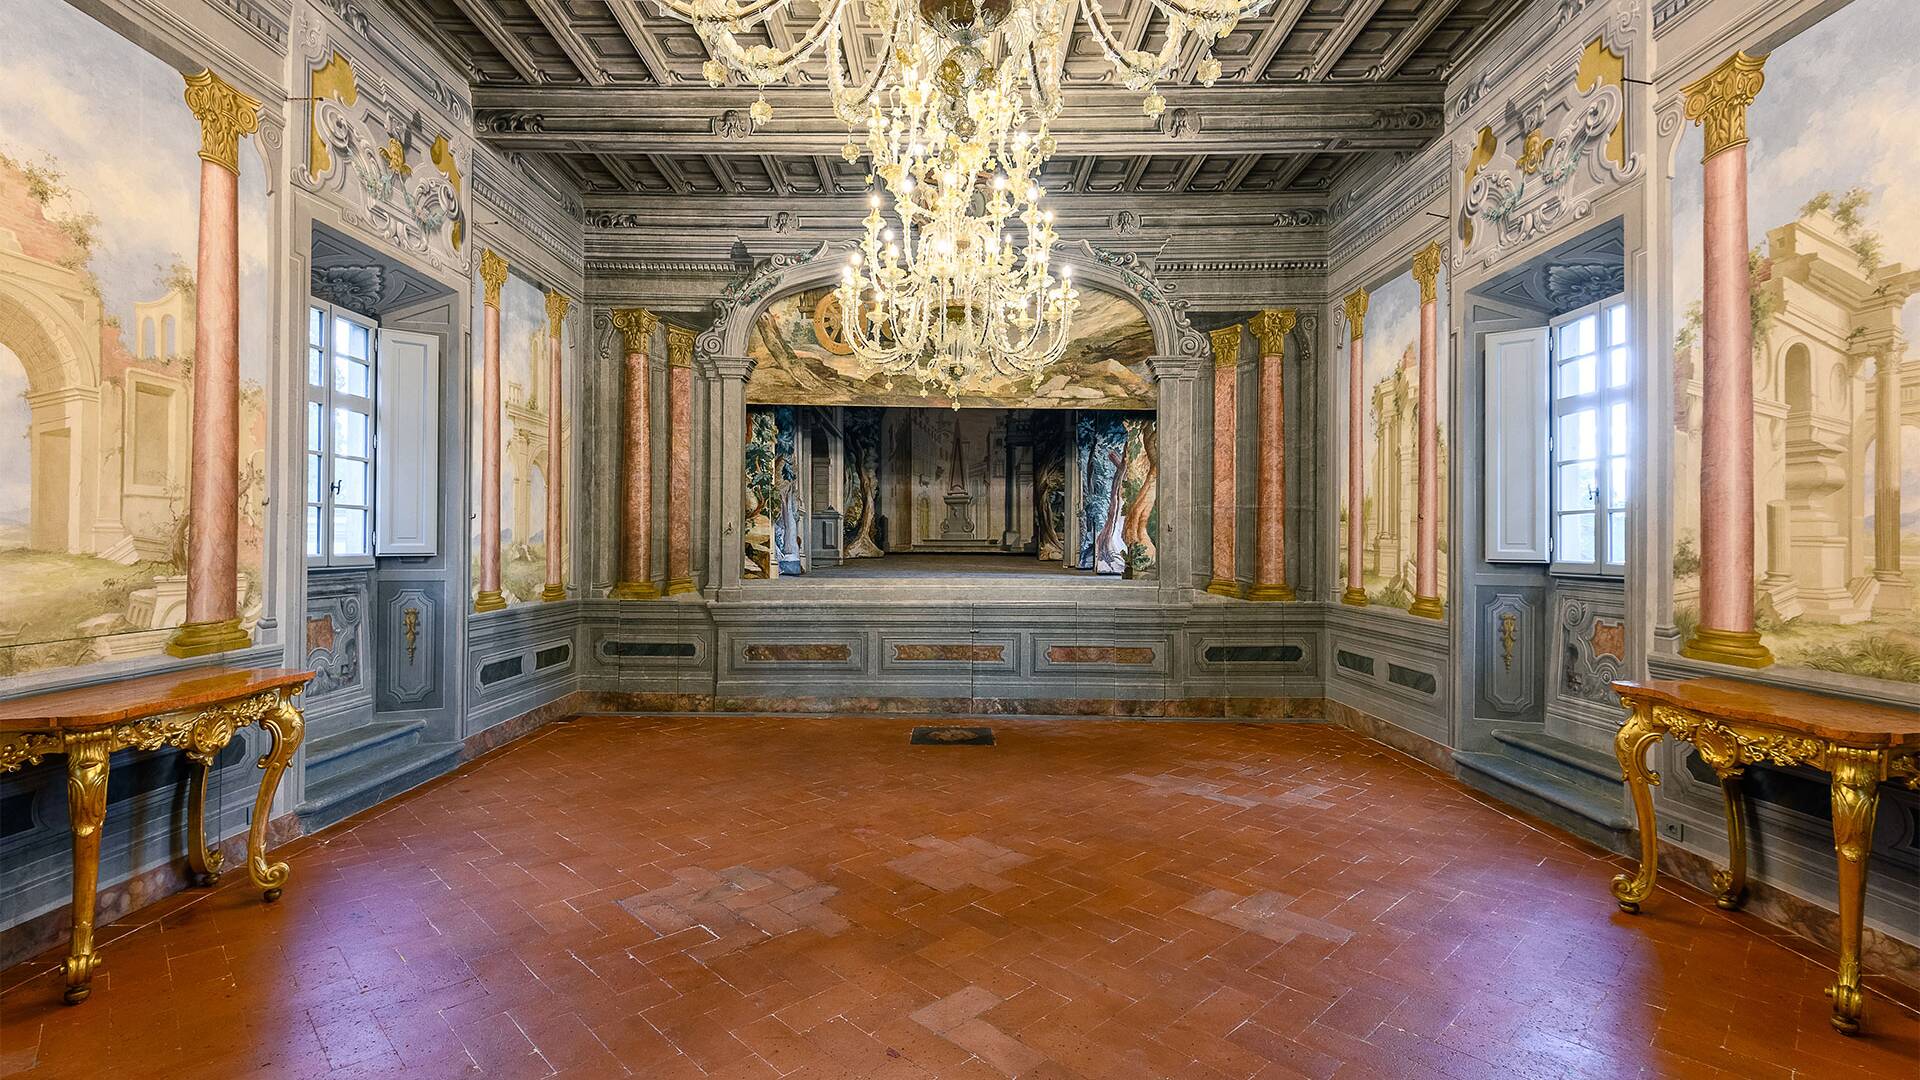 luxury chandelier and hand-painted frescoes